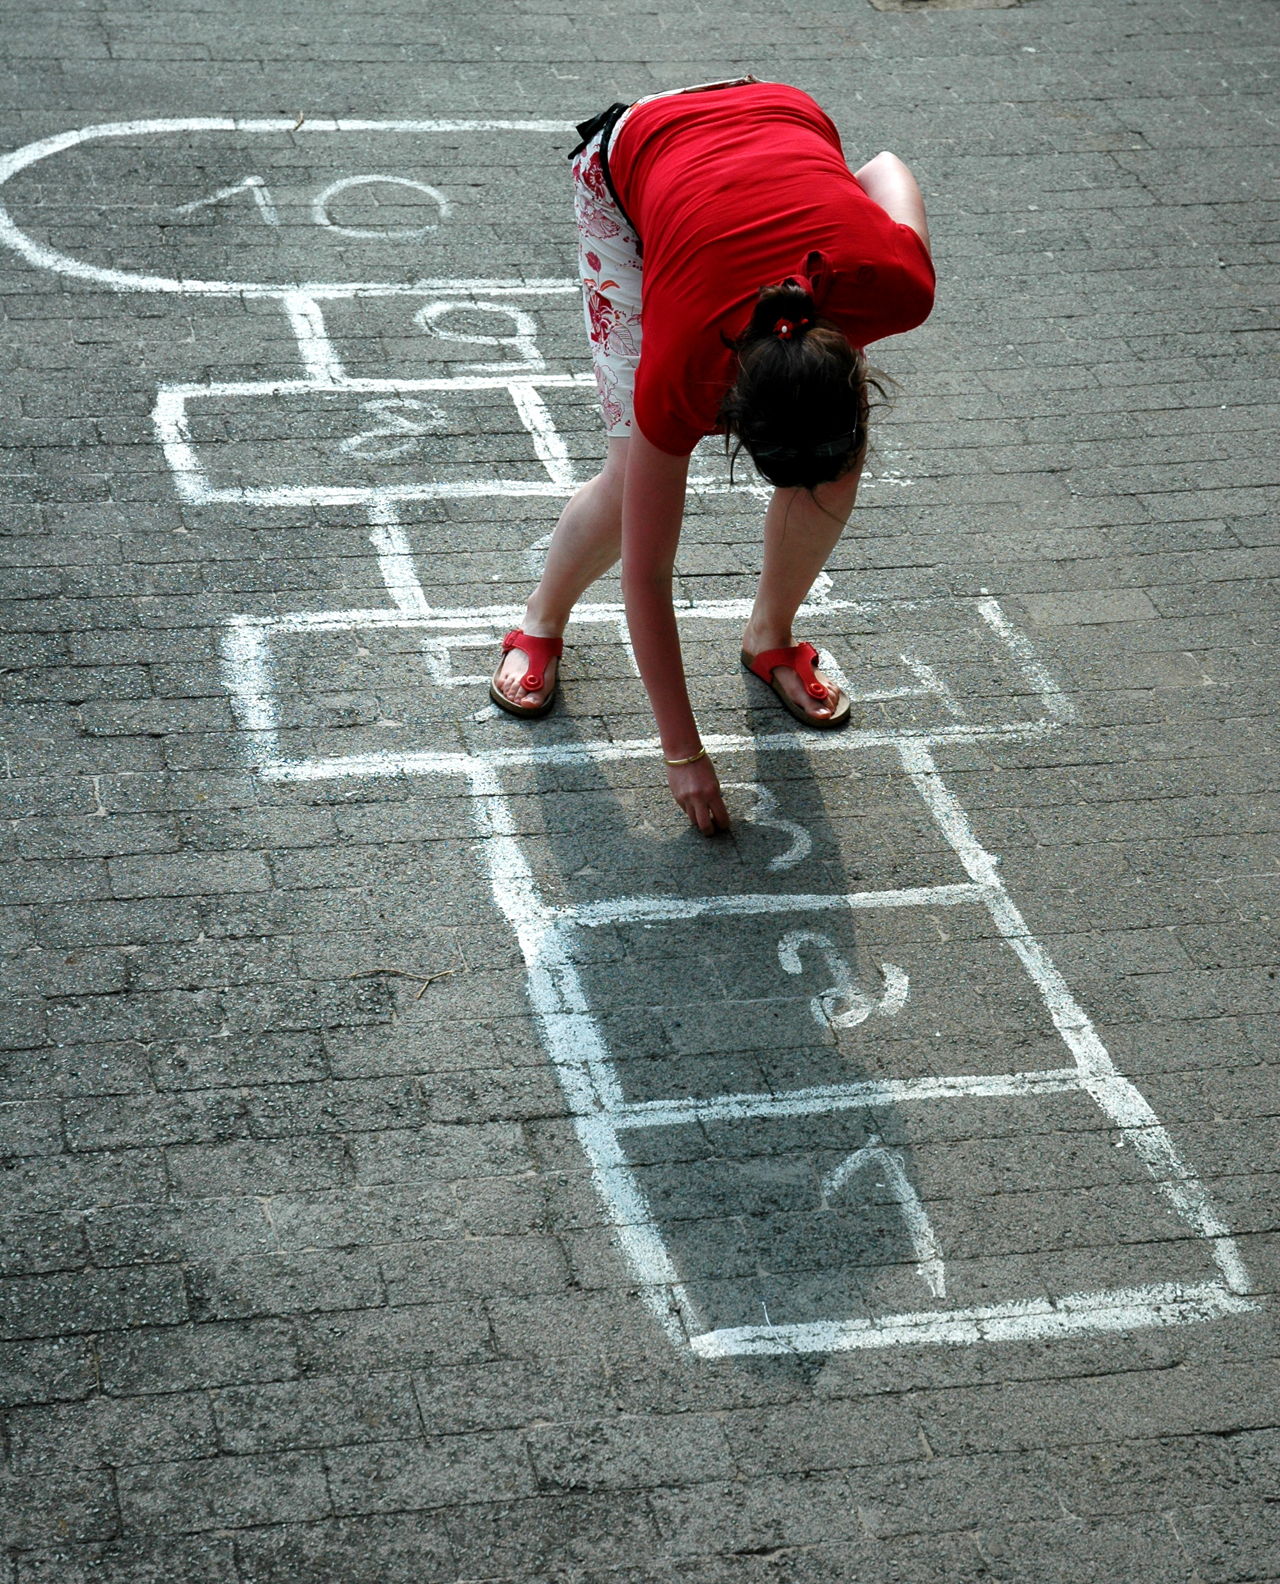 What Are The Basic Rules to Play Hopscotch